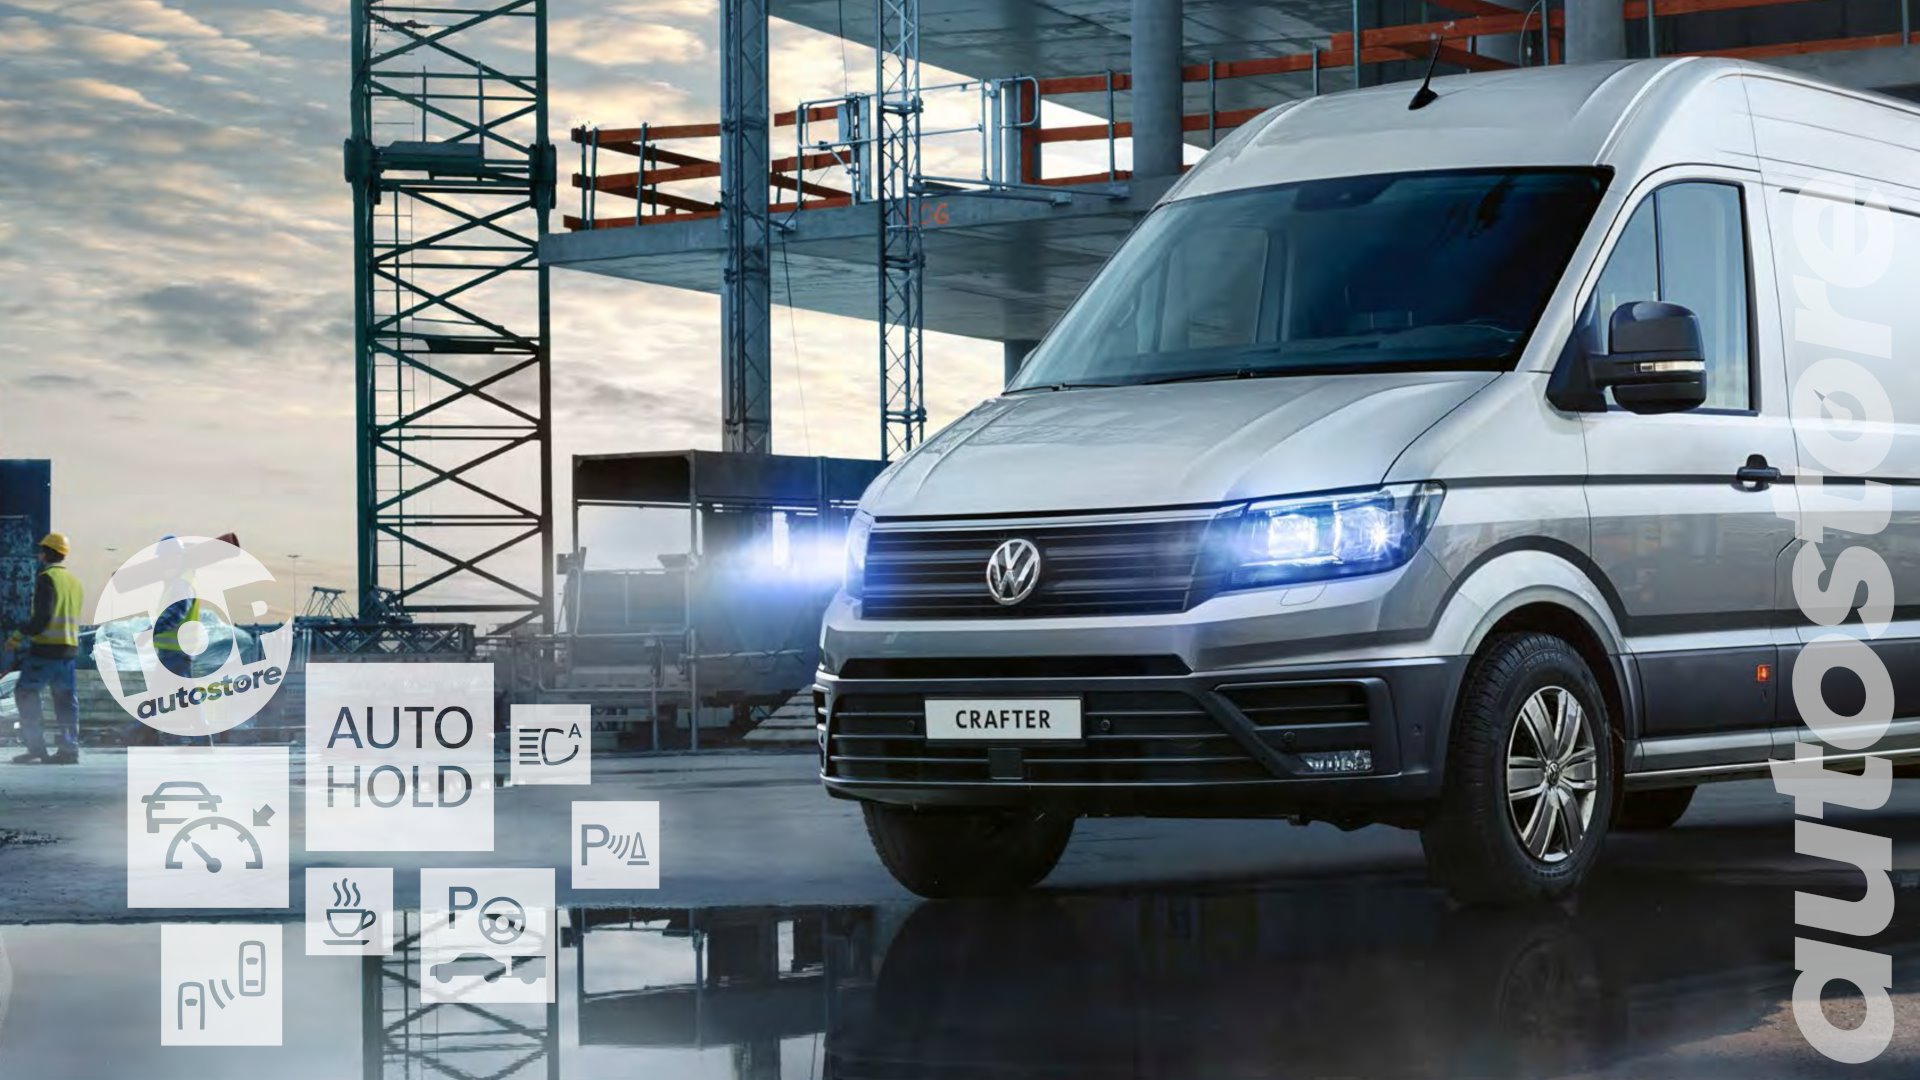 AutoStrore VW Crafter - 12